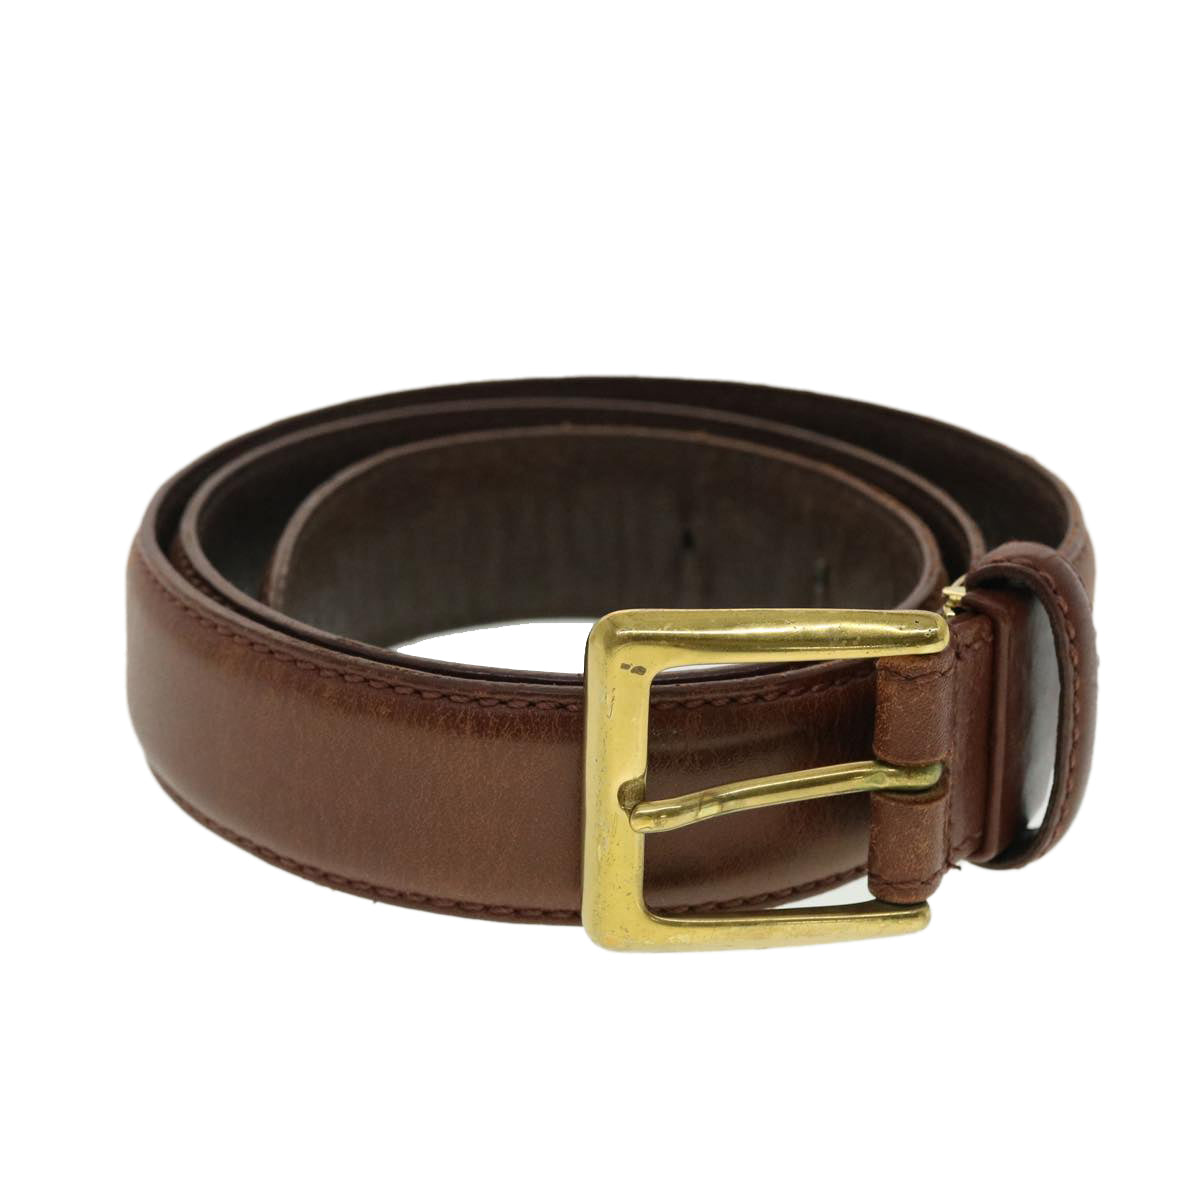 Christian Dior Belt Leather 36.2"" Brown Auth ti1042